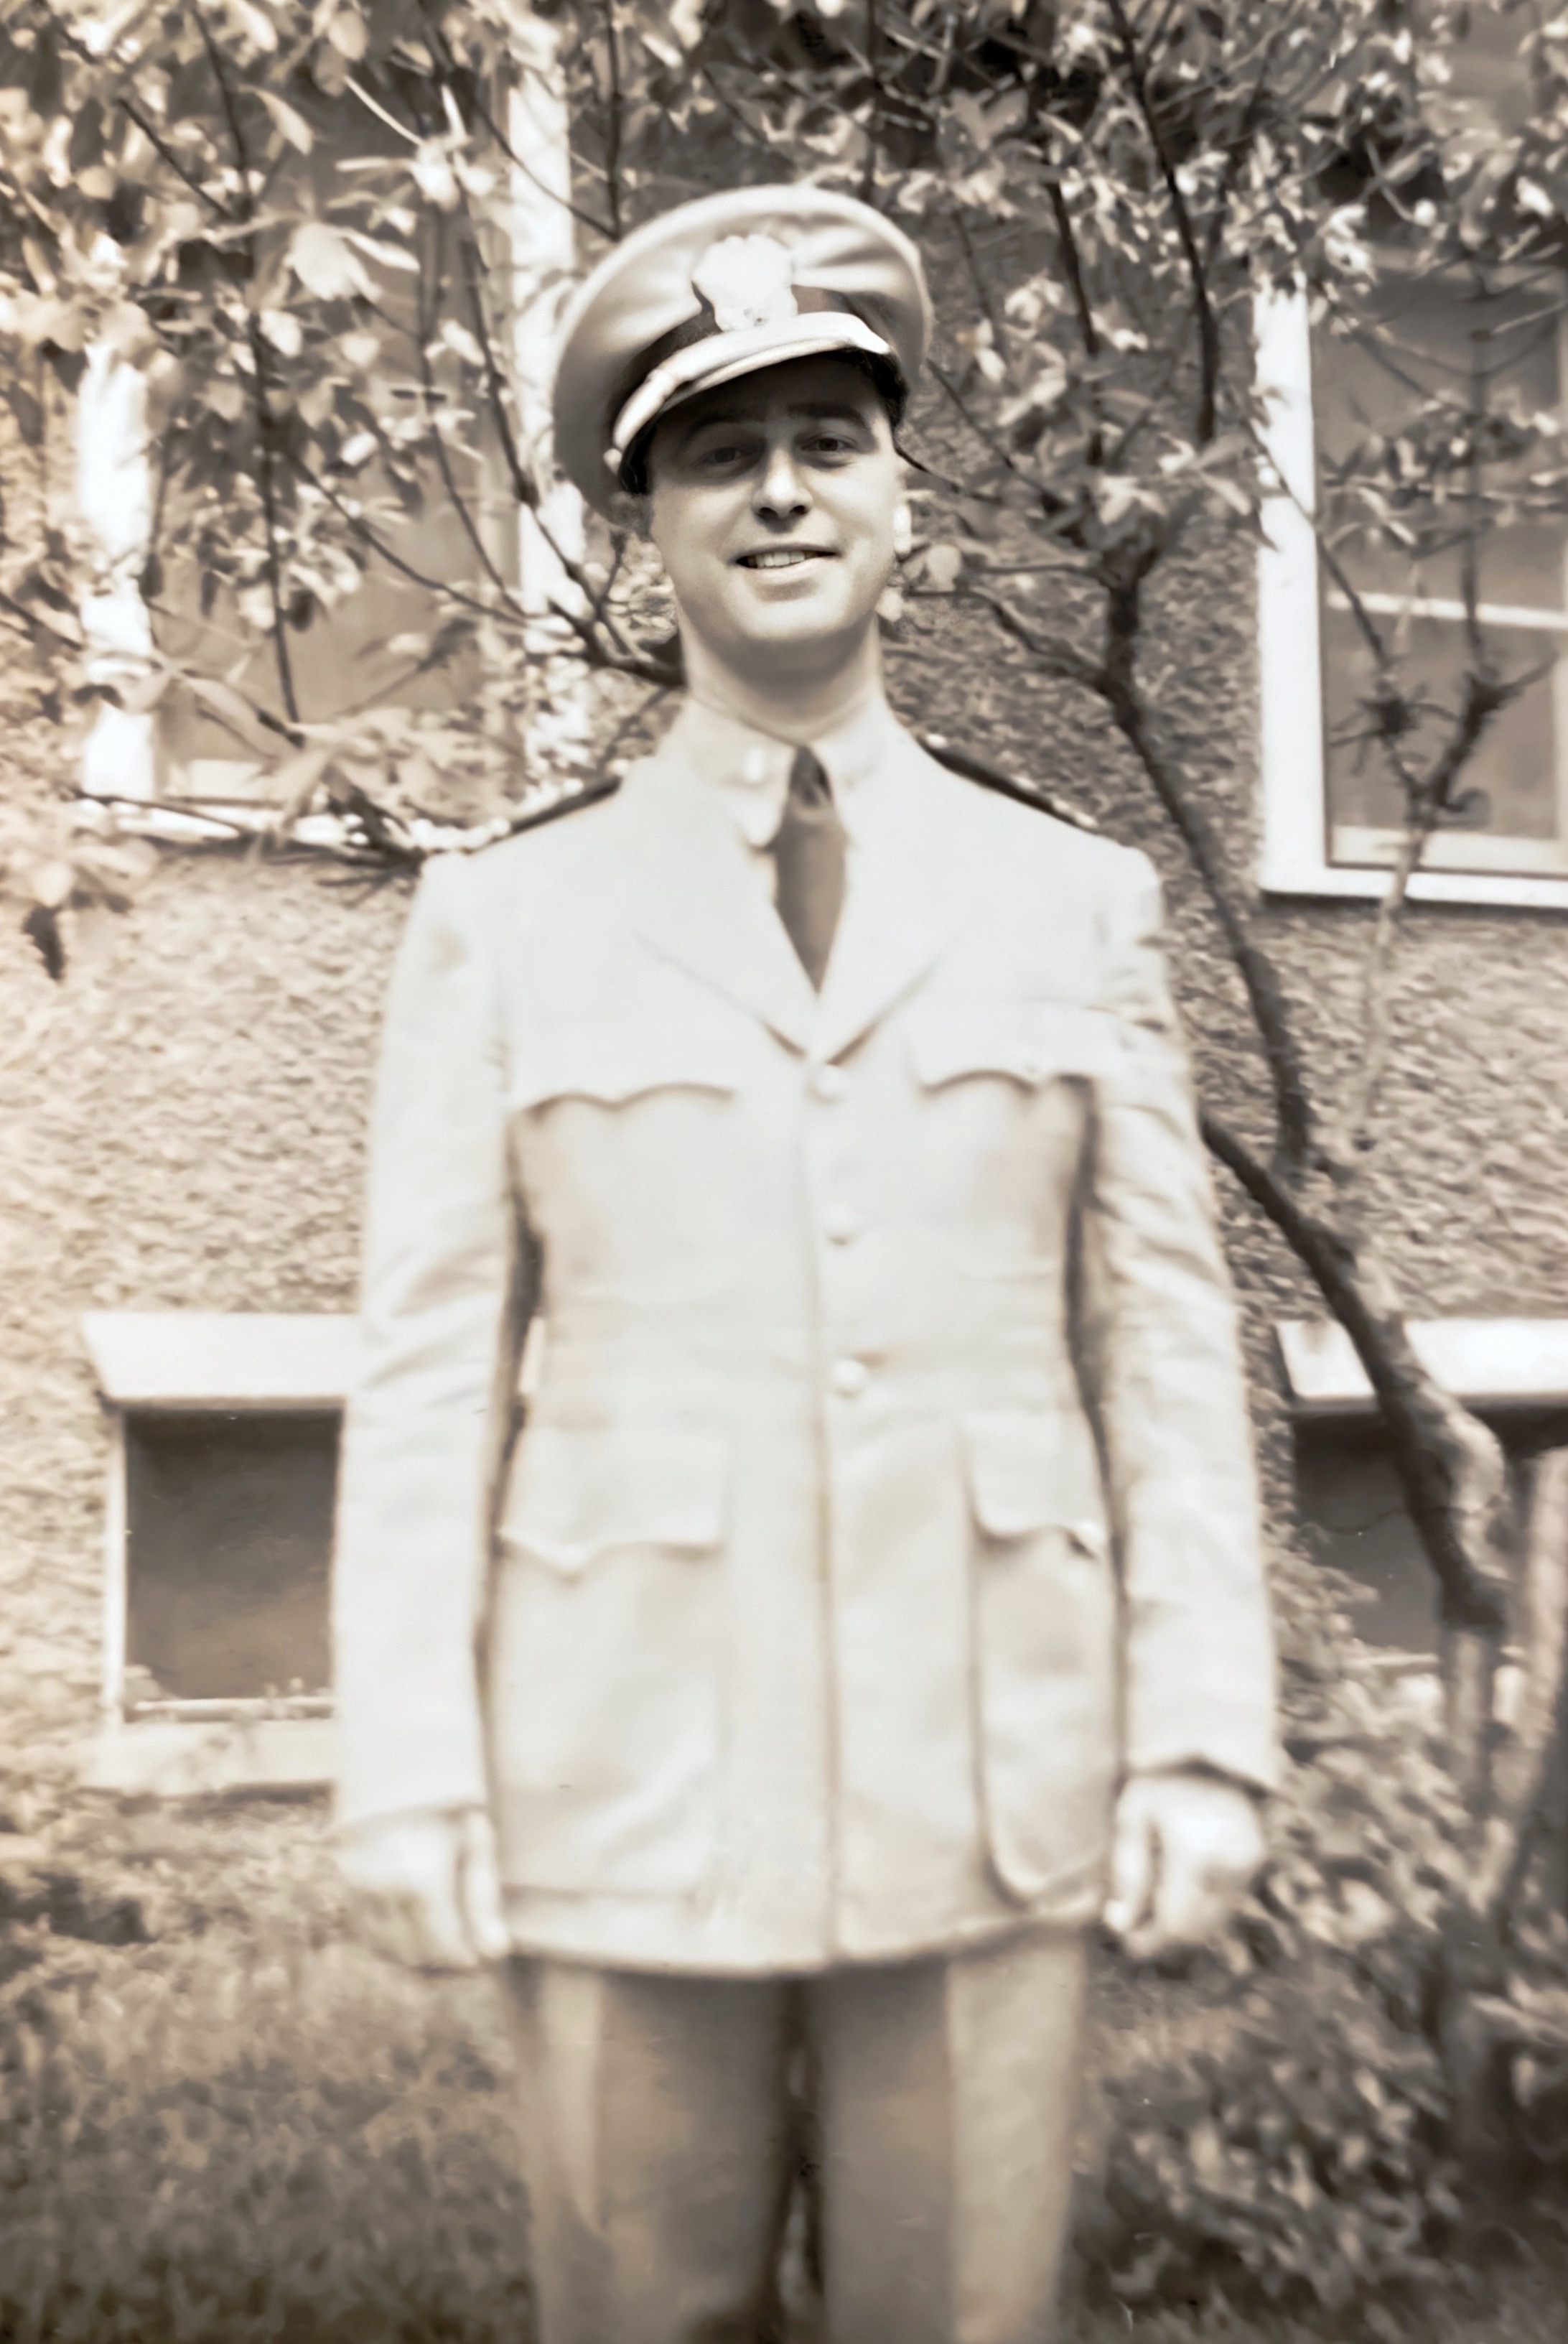 Lt. George Gryson 
- In Domestic Active Duty 06/27/1943 until 11/28/1945
- In Active Duty in Japan 01/05/1944 until 12/03/1944